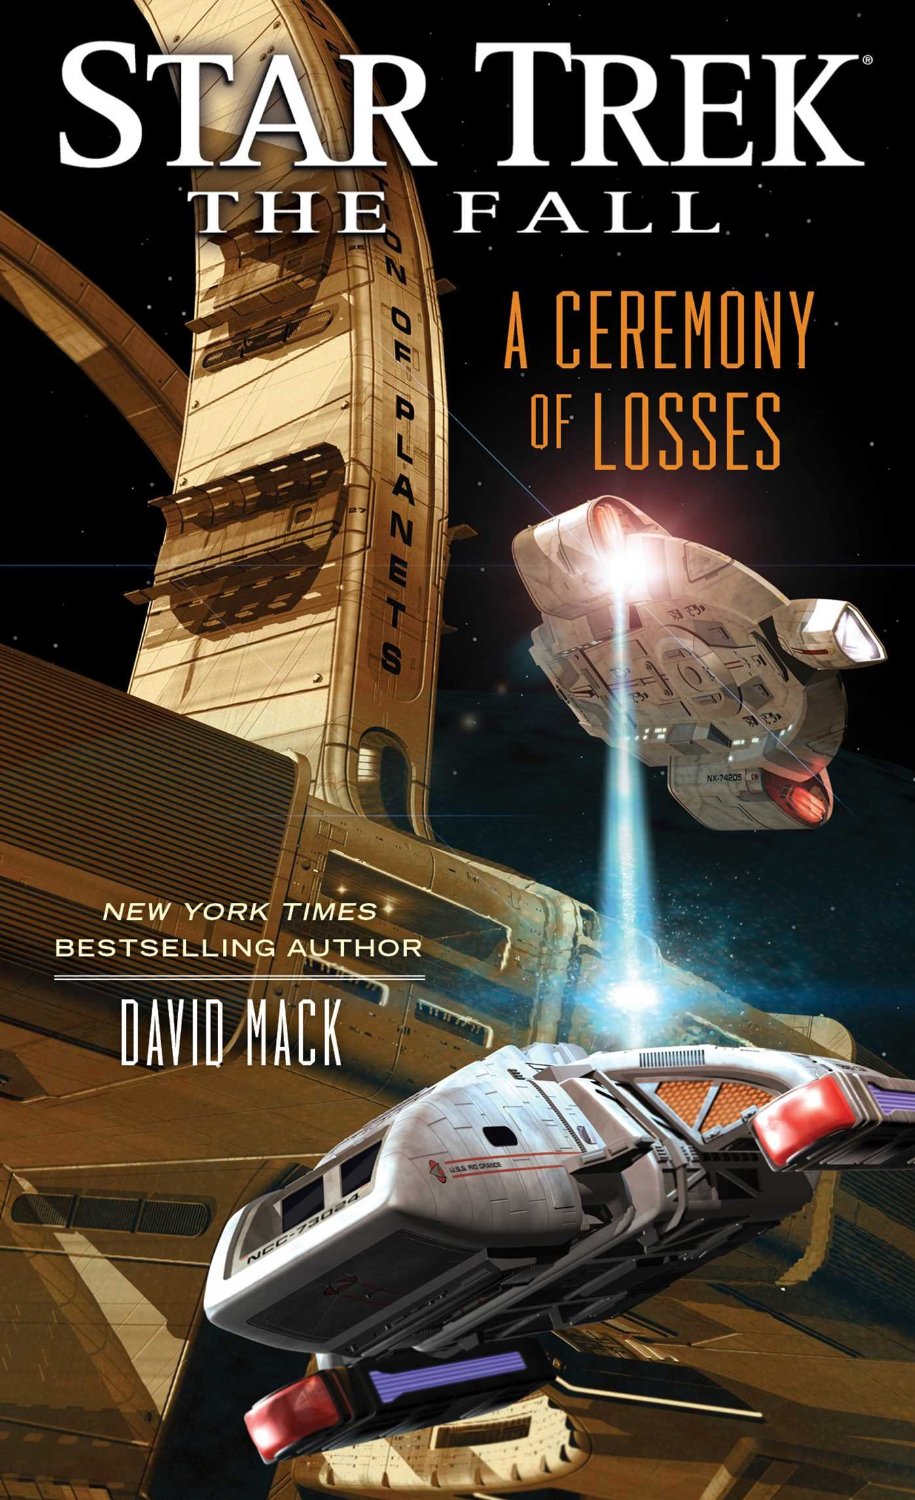 “Star Trek: The Fall: A Ceremony of Losses” Review by Lessaccurategrandmother.blogspot.com